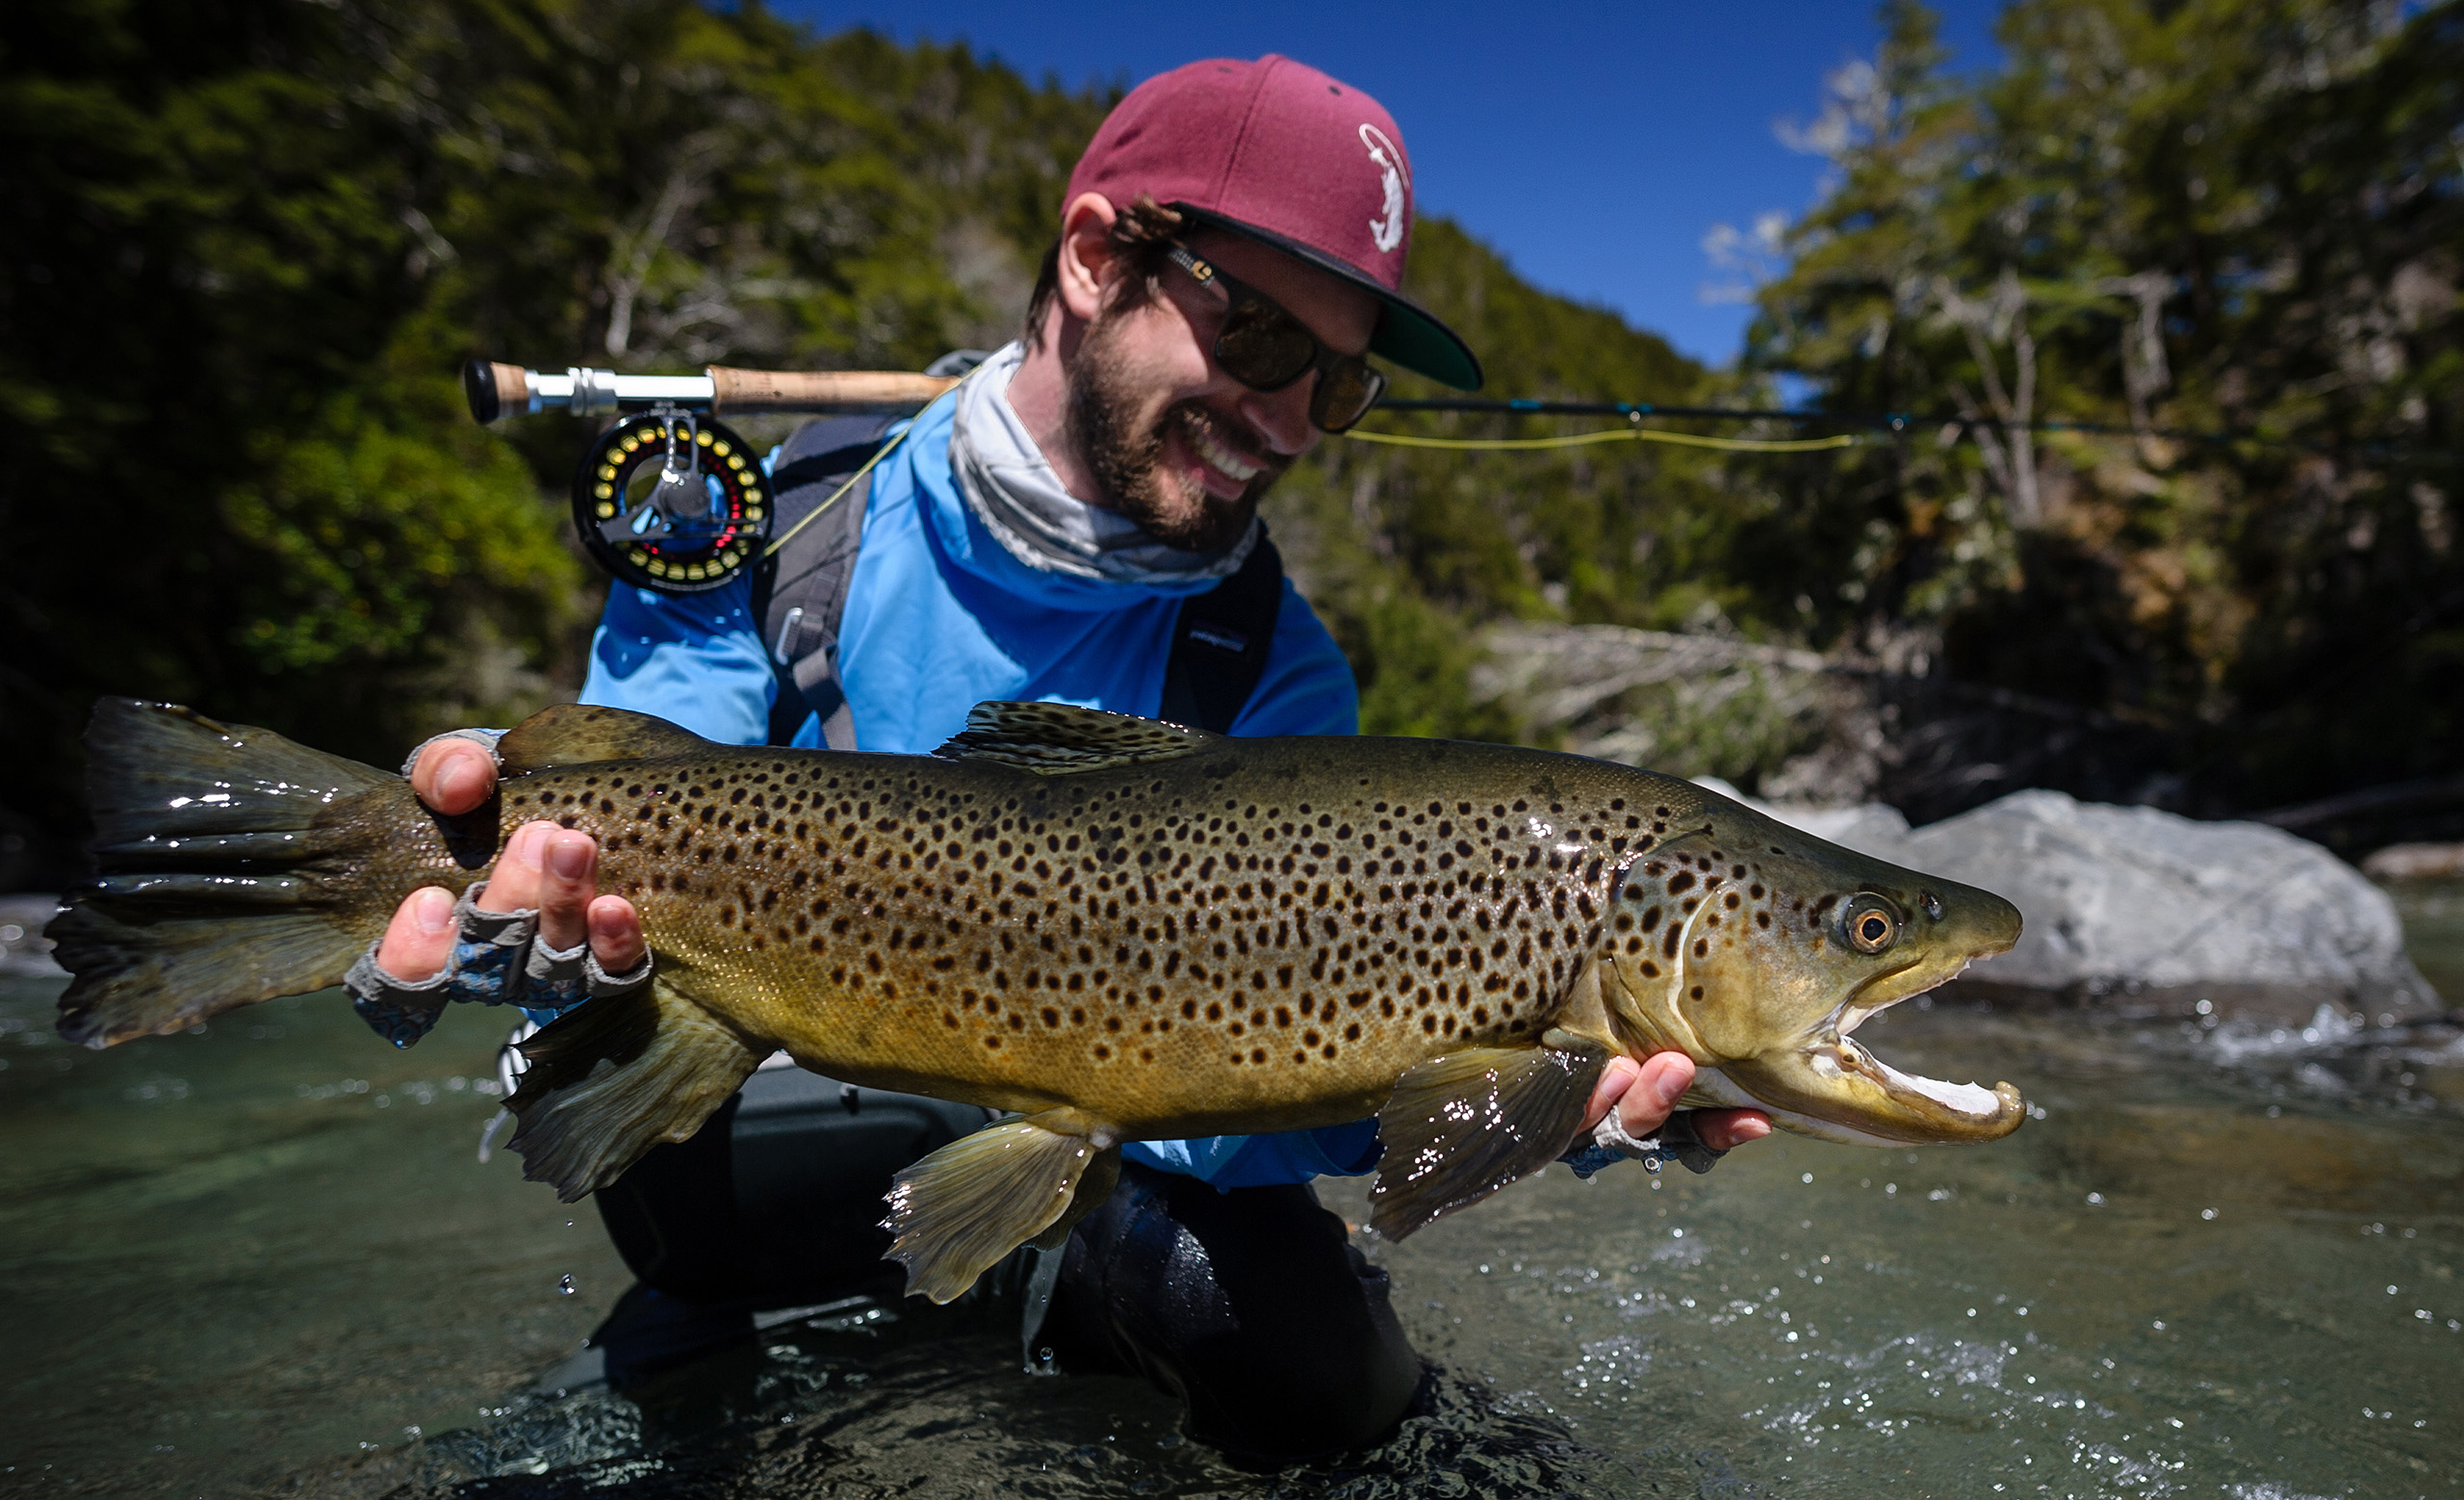 New Zealand - Fly Fishing dream come true